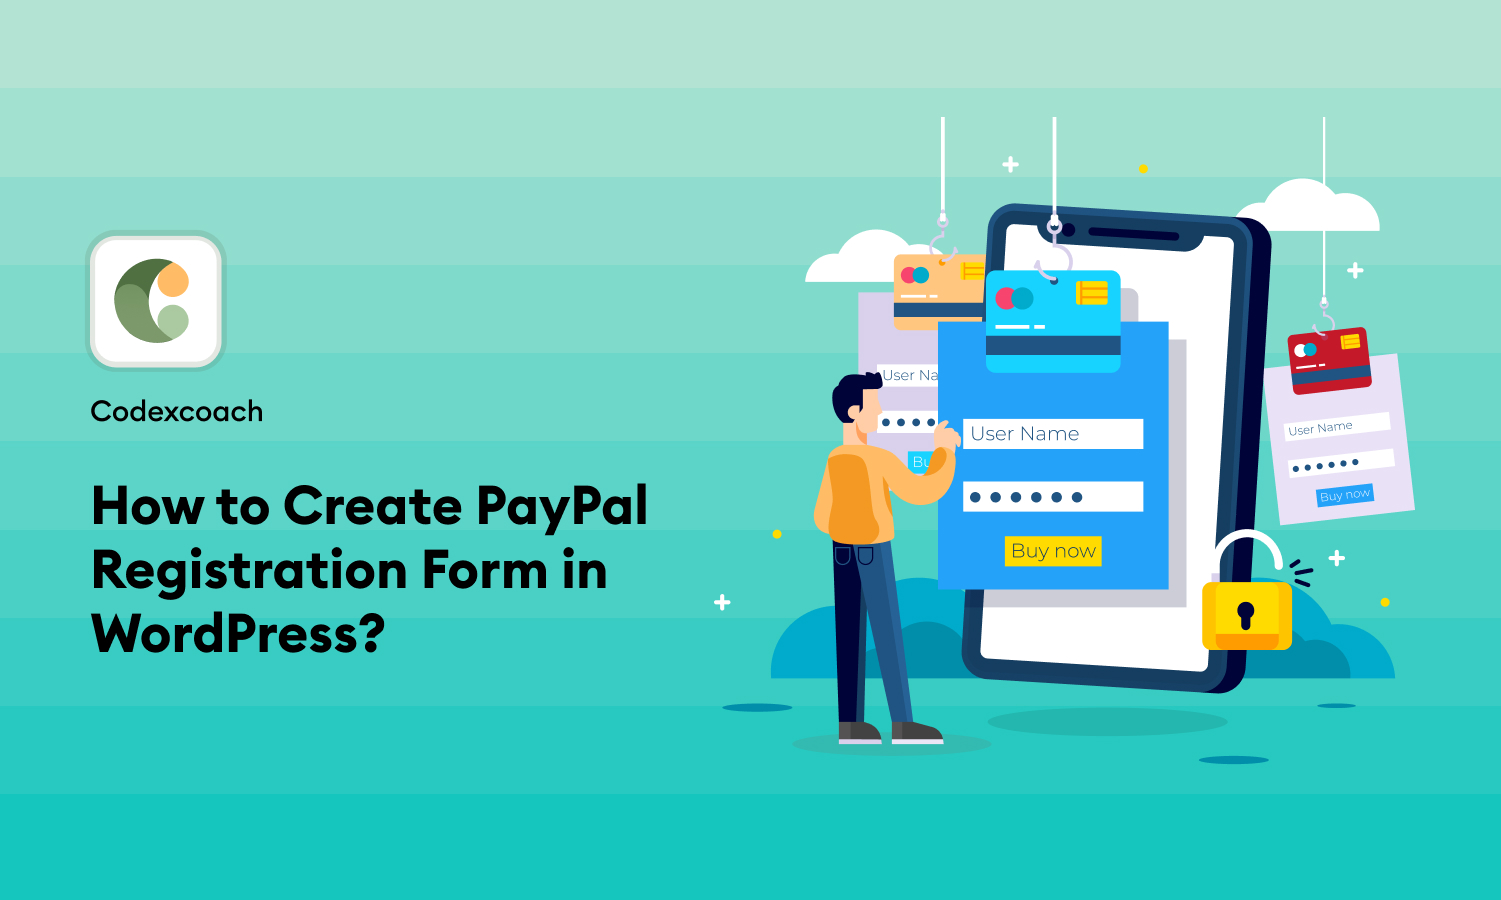 How to Create a PayPal Registration Form in WordPress